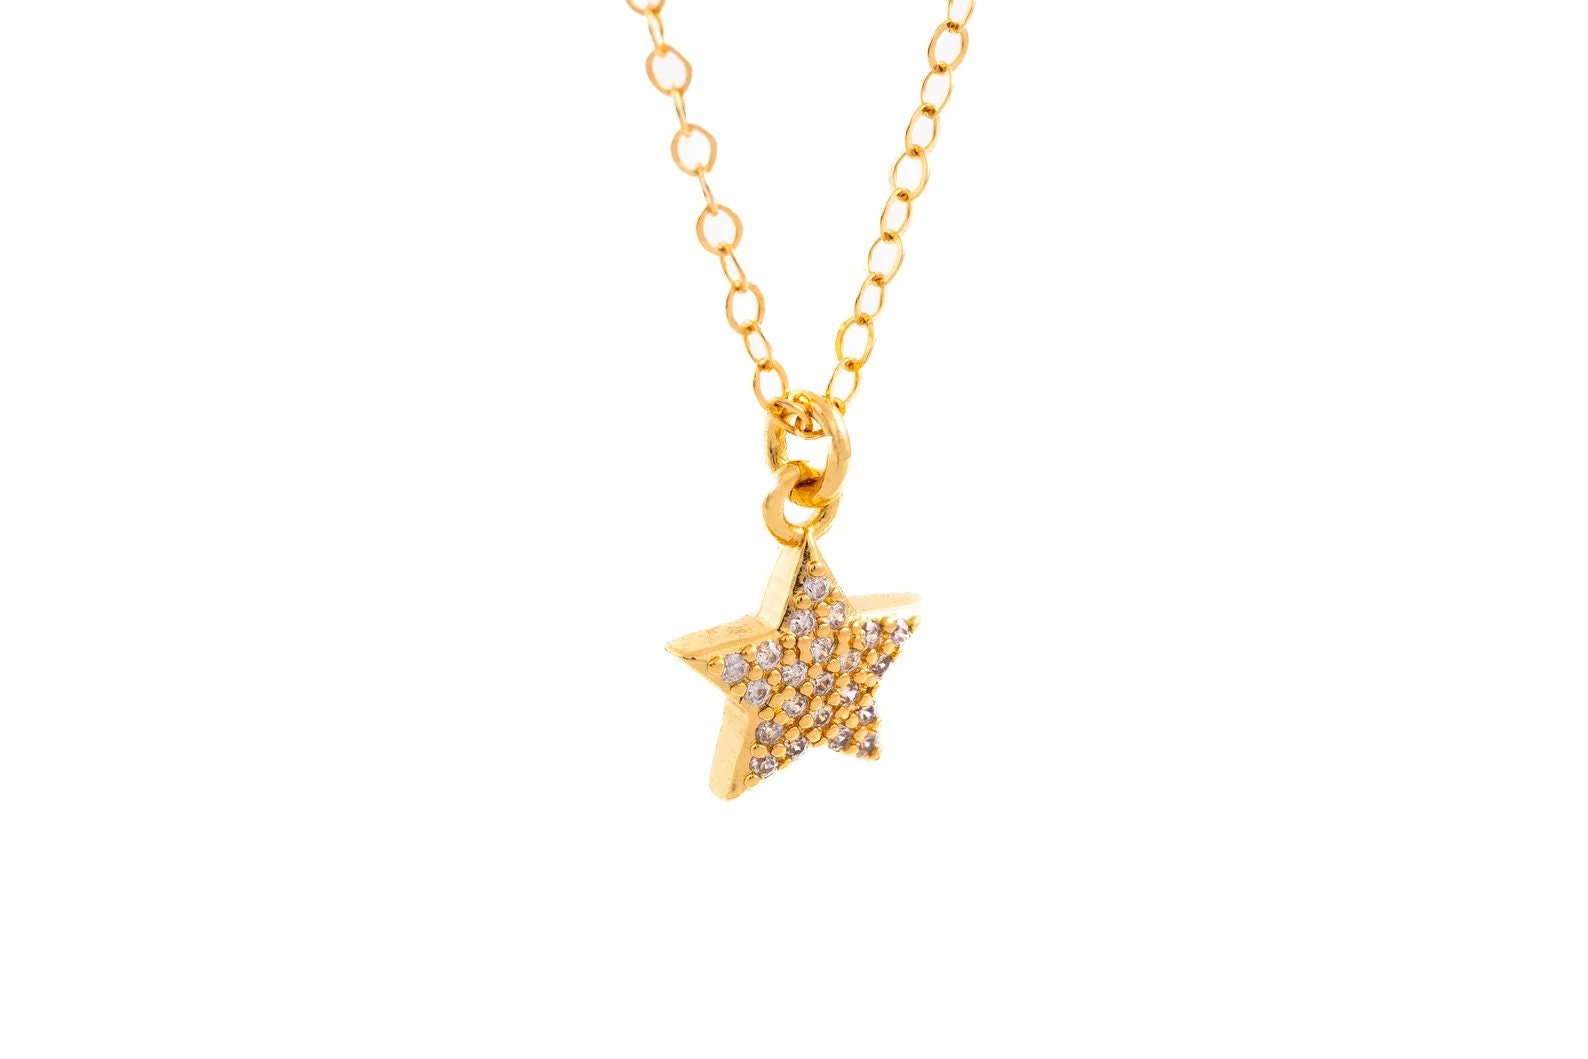 Star Necklace Gold - 14K gold filled star - Cz star necklace - gift for daughter - brilliant stars - g necklace star - goddaughter gifts